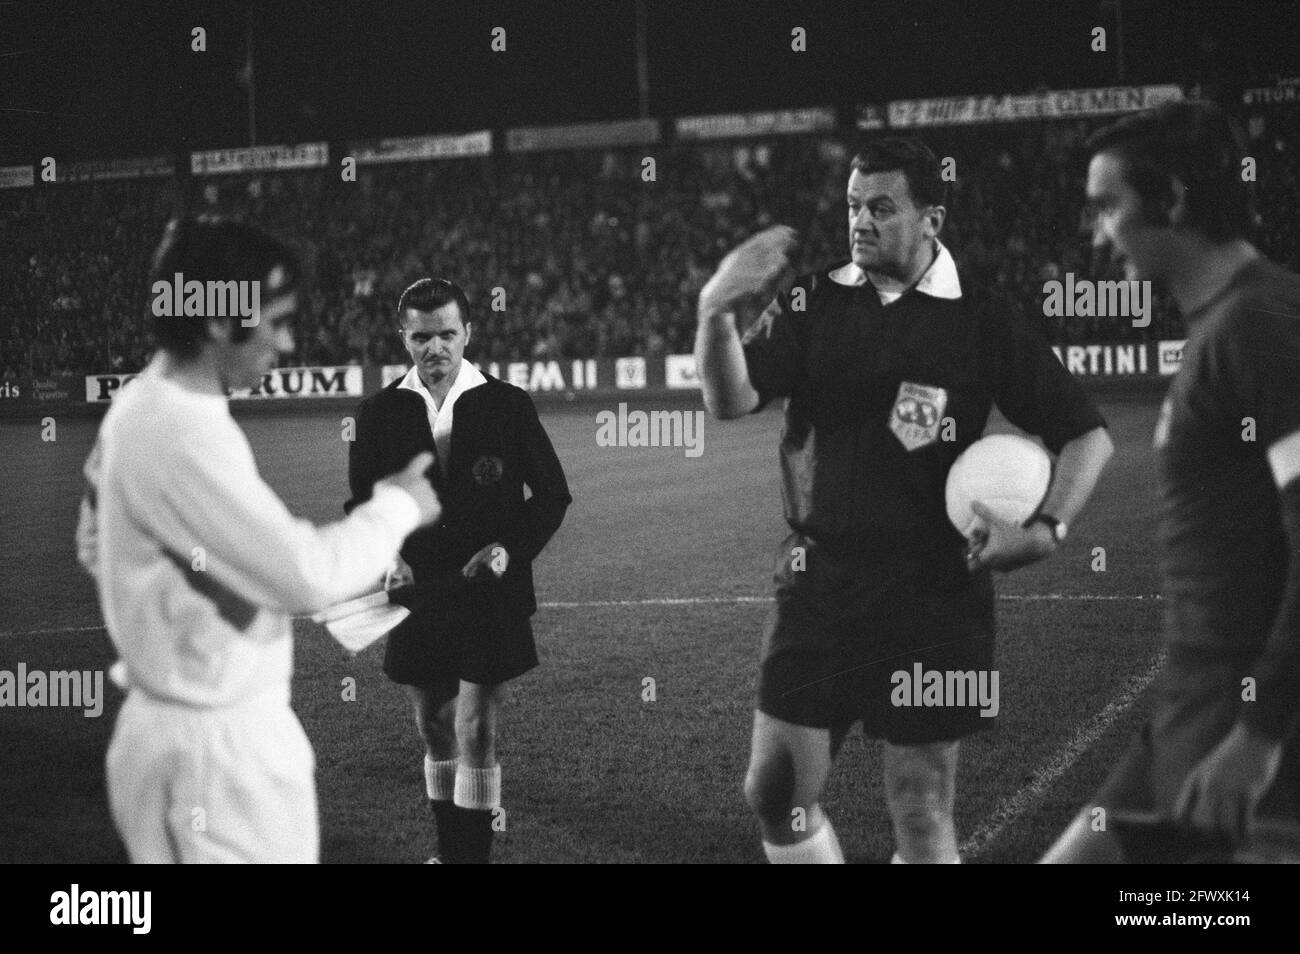 PSV against Real Madrid 2-0, referee Kunze with captains Pleun Strik and Zoco, 3 November 1971, referees, sports, soccer, The Netherlands, 20th centur Stock Photo